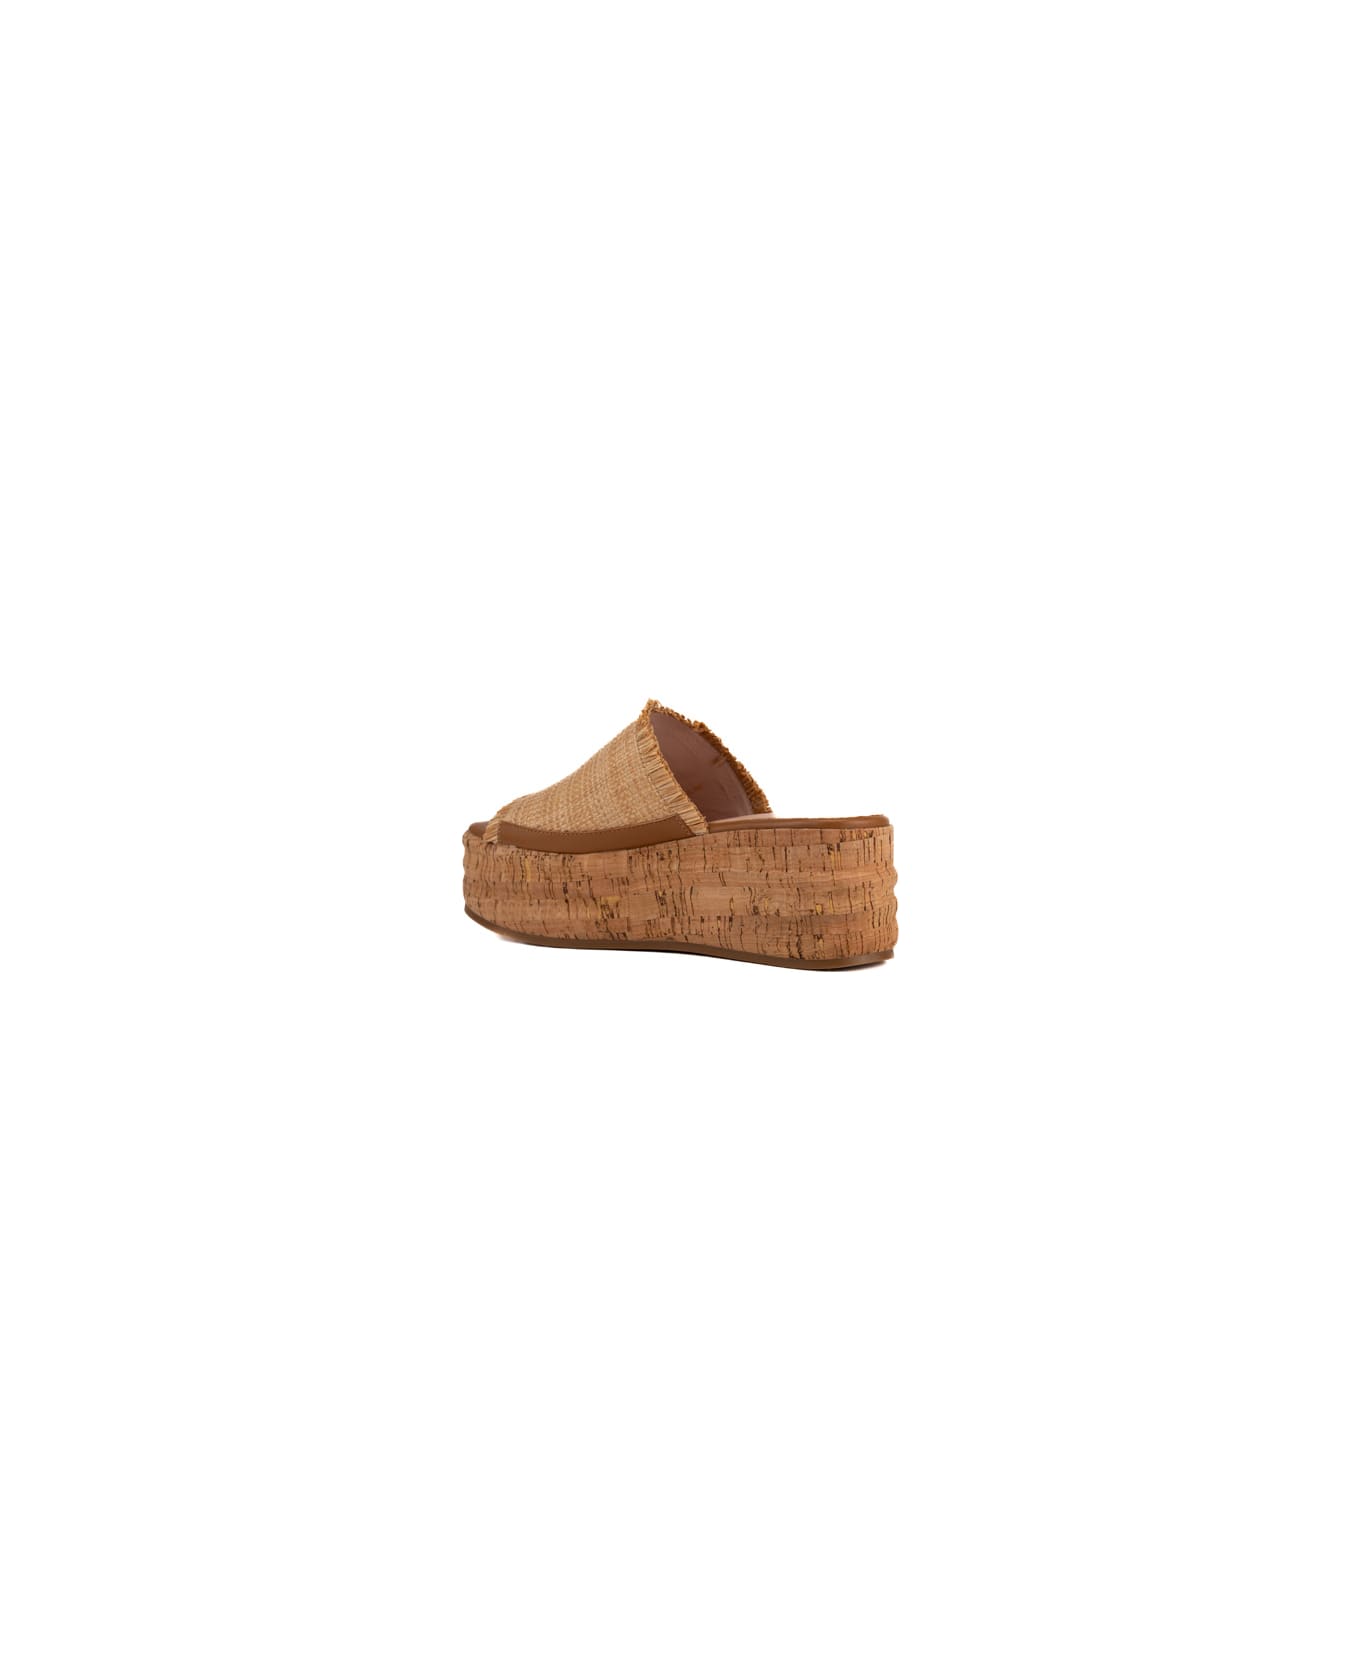 Coccinelle Raffia And Cork Wedges - Natural/cuir